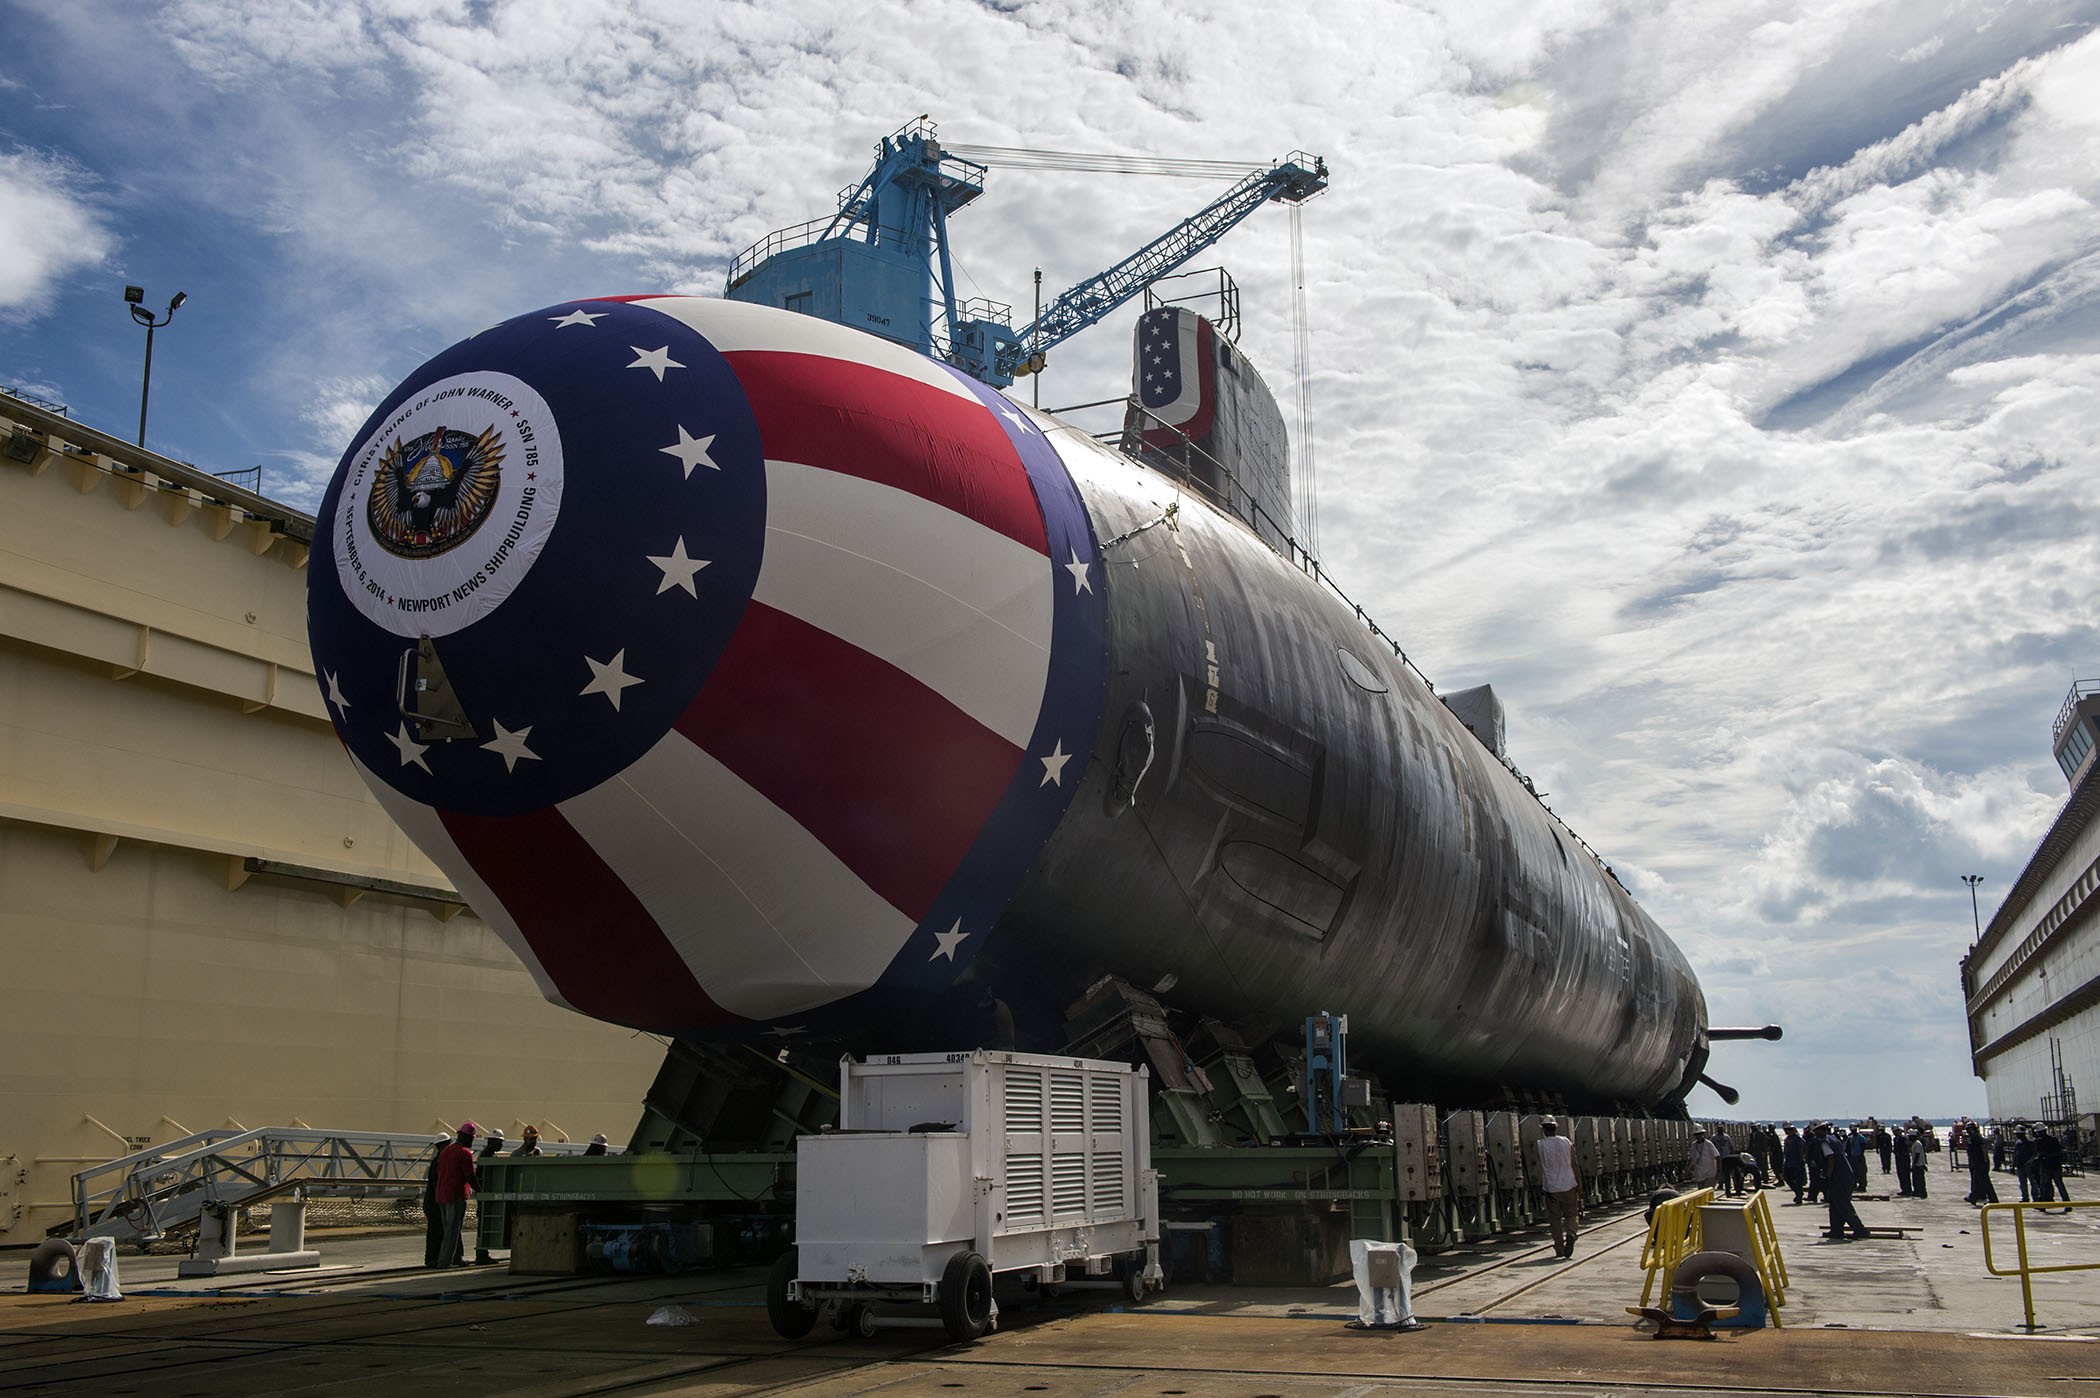 The Virginia-class attack submarine Pre-commissioning unit John Warner (SSN 785) is moved to Newport News Shipbuilding’s floating dry dock on Sept. 1, 2014. Huntington Ingalls Industries photo.